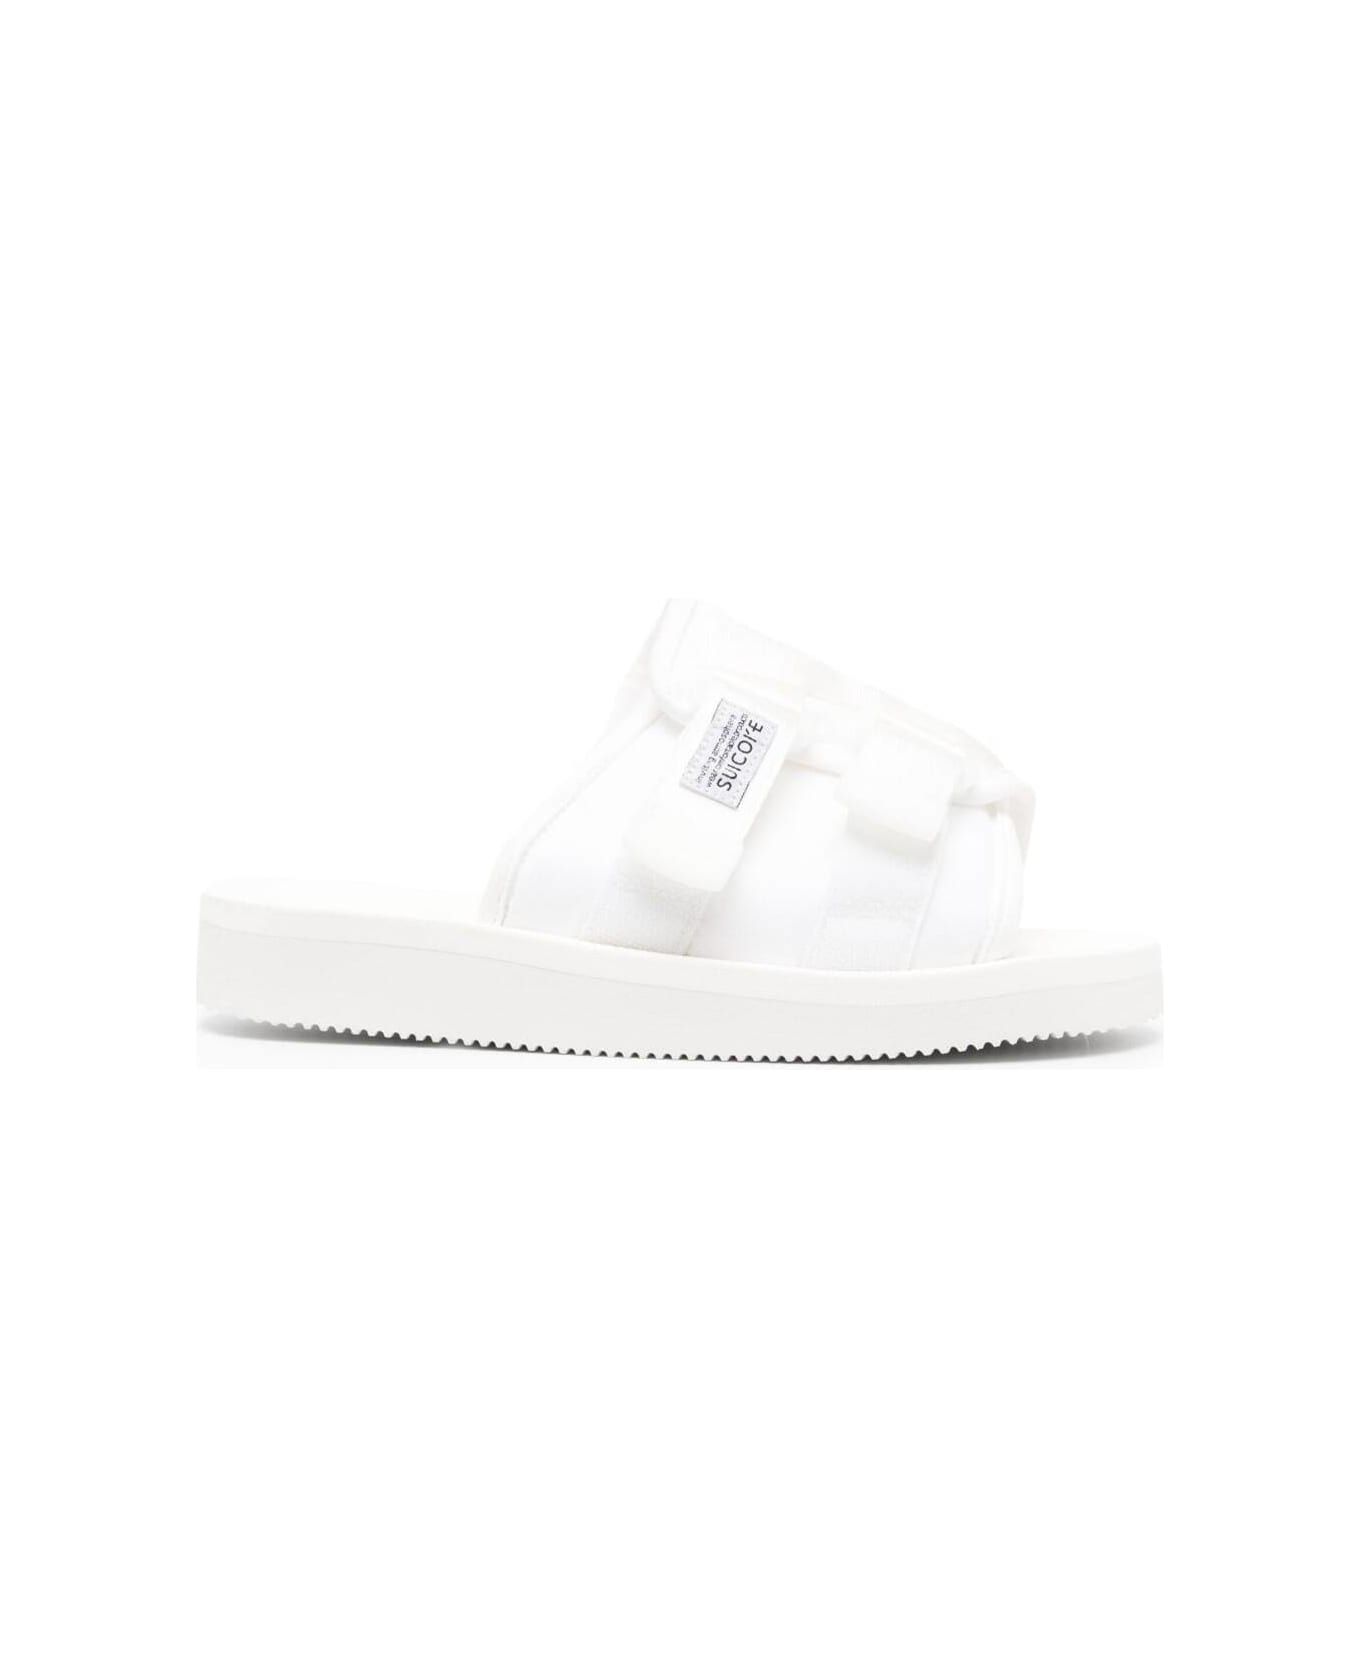 SUICOKE 'kaw-cab' White Sandals With Velcro Fastening In Nylon Woman Suicoke - White